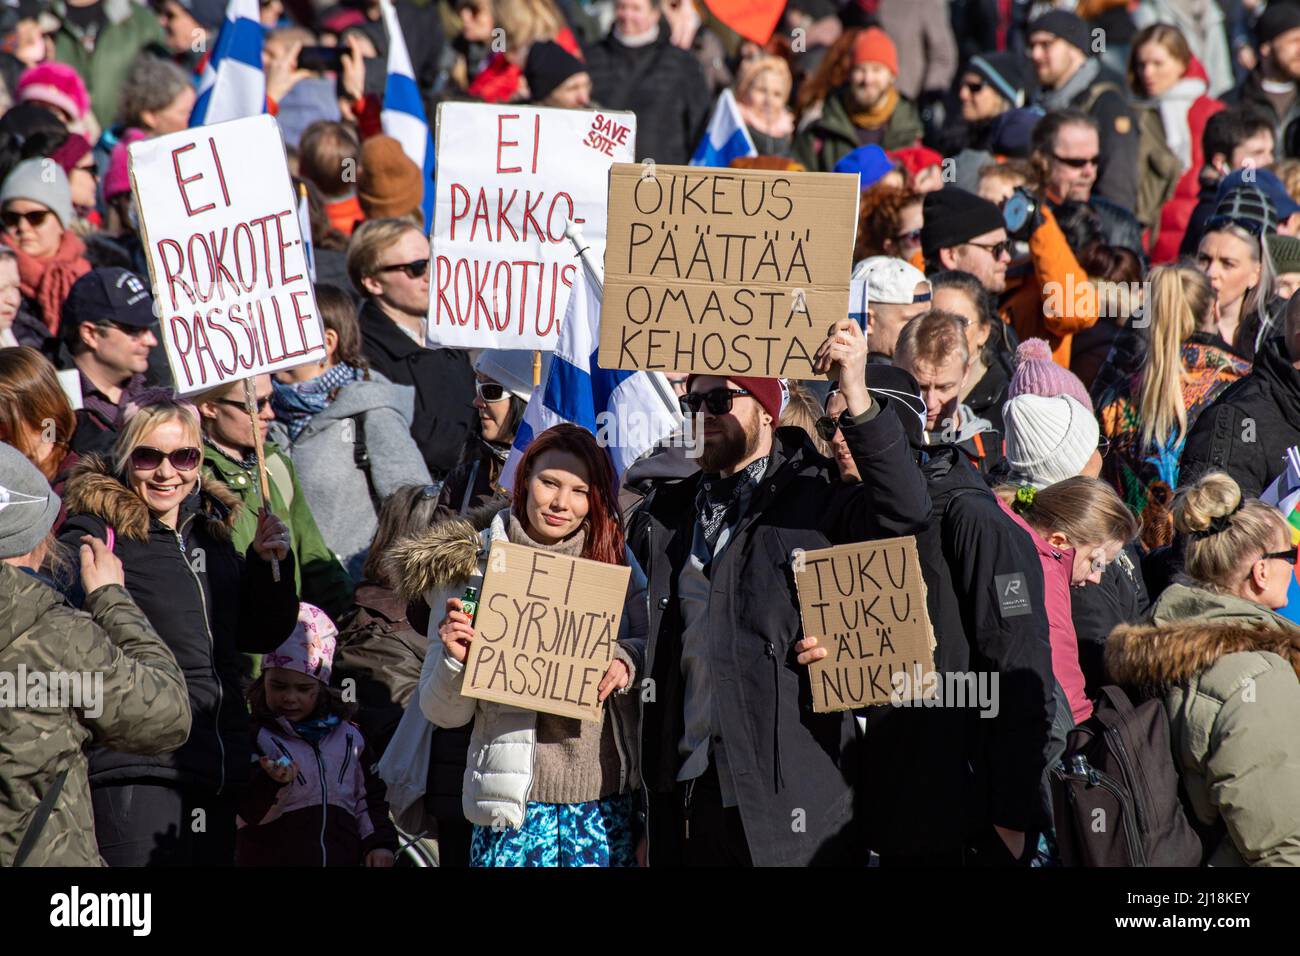 Anti-vaccination protesters with signs at Worldwide Demonstration 7.0 on Senate Square or Senaatintori in Helsinki, Finland Stock Photo